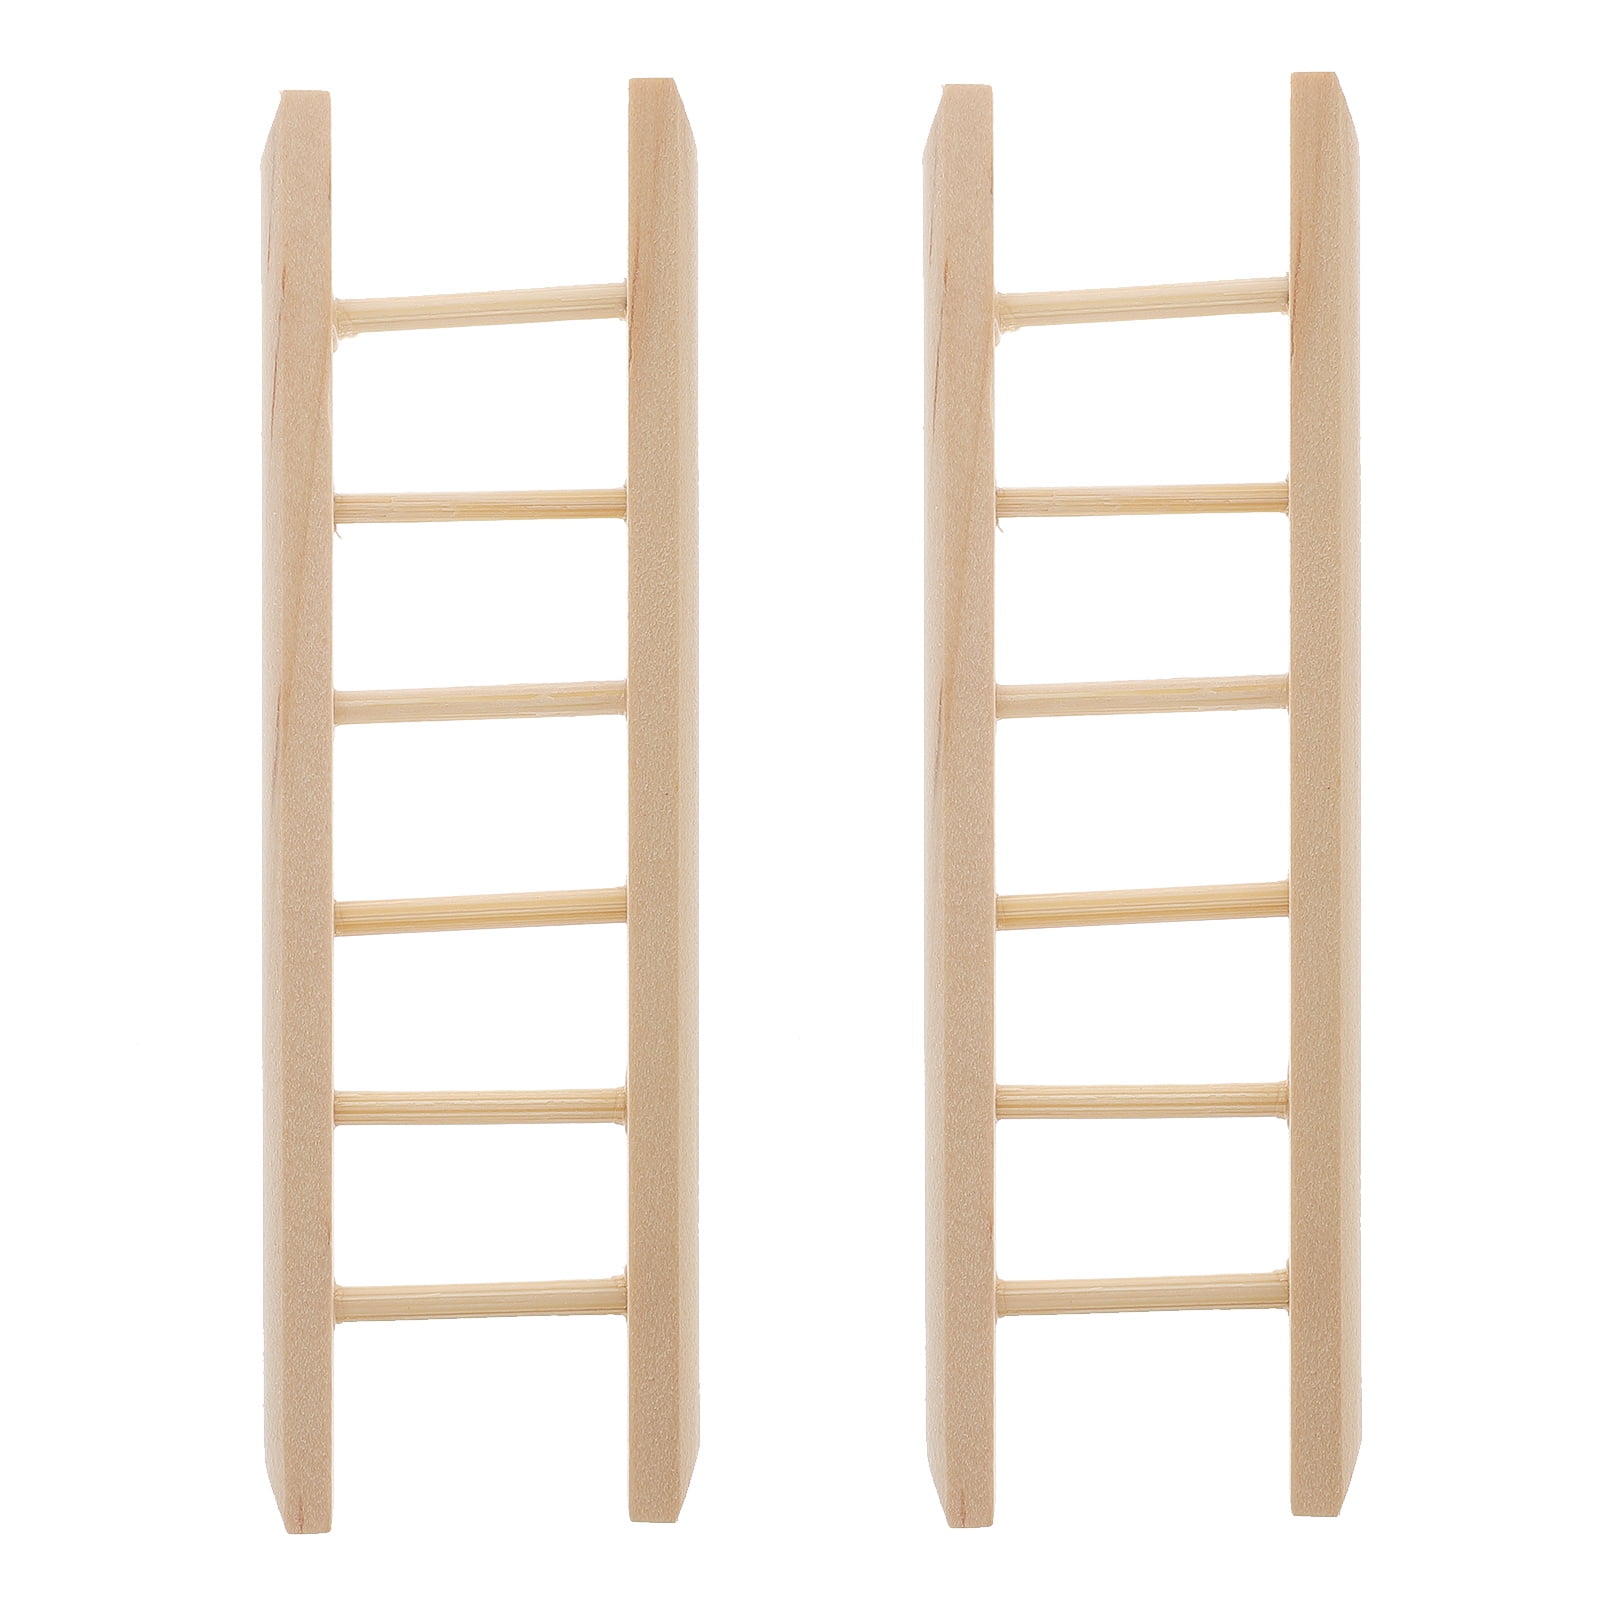 Small Ladder Made Tiny Clothespins Pencils Stock Photo 331132469